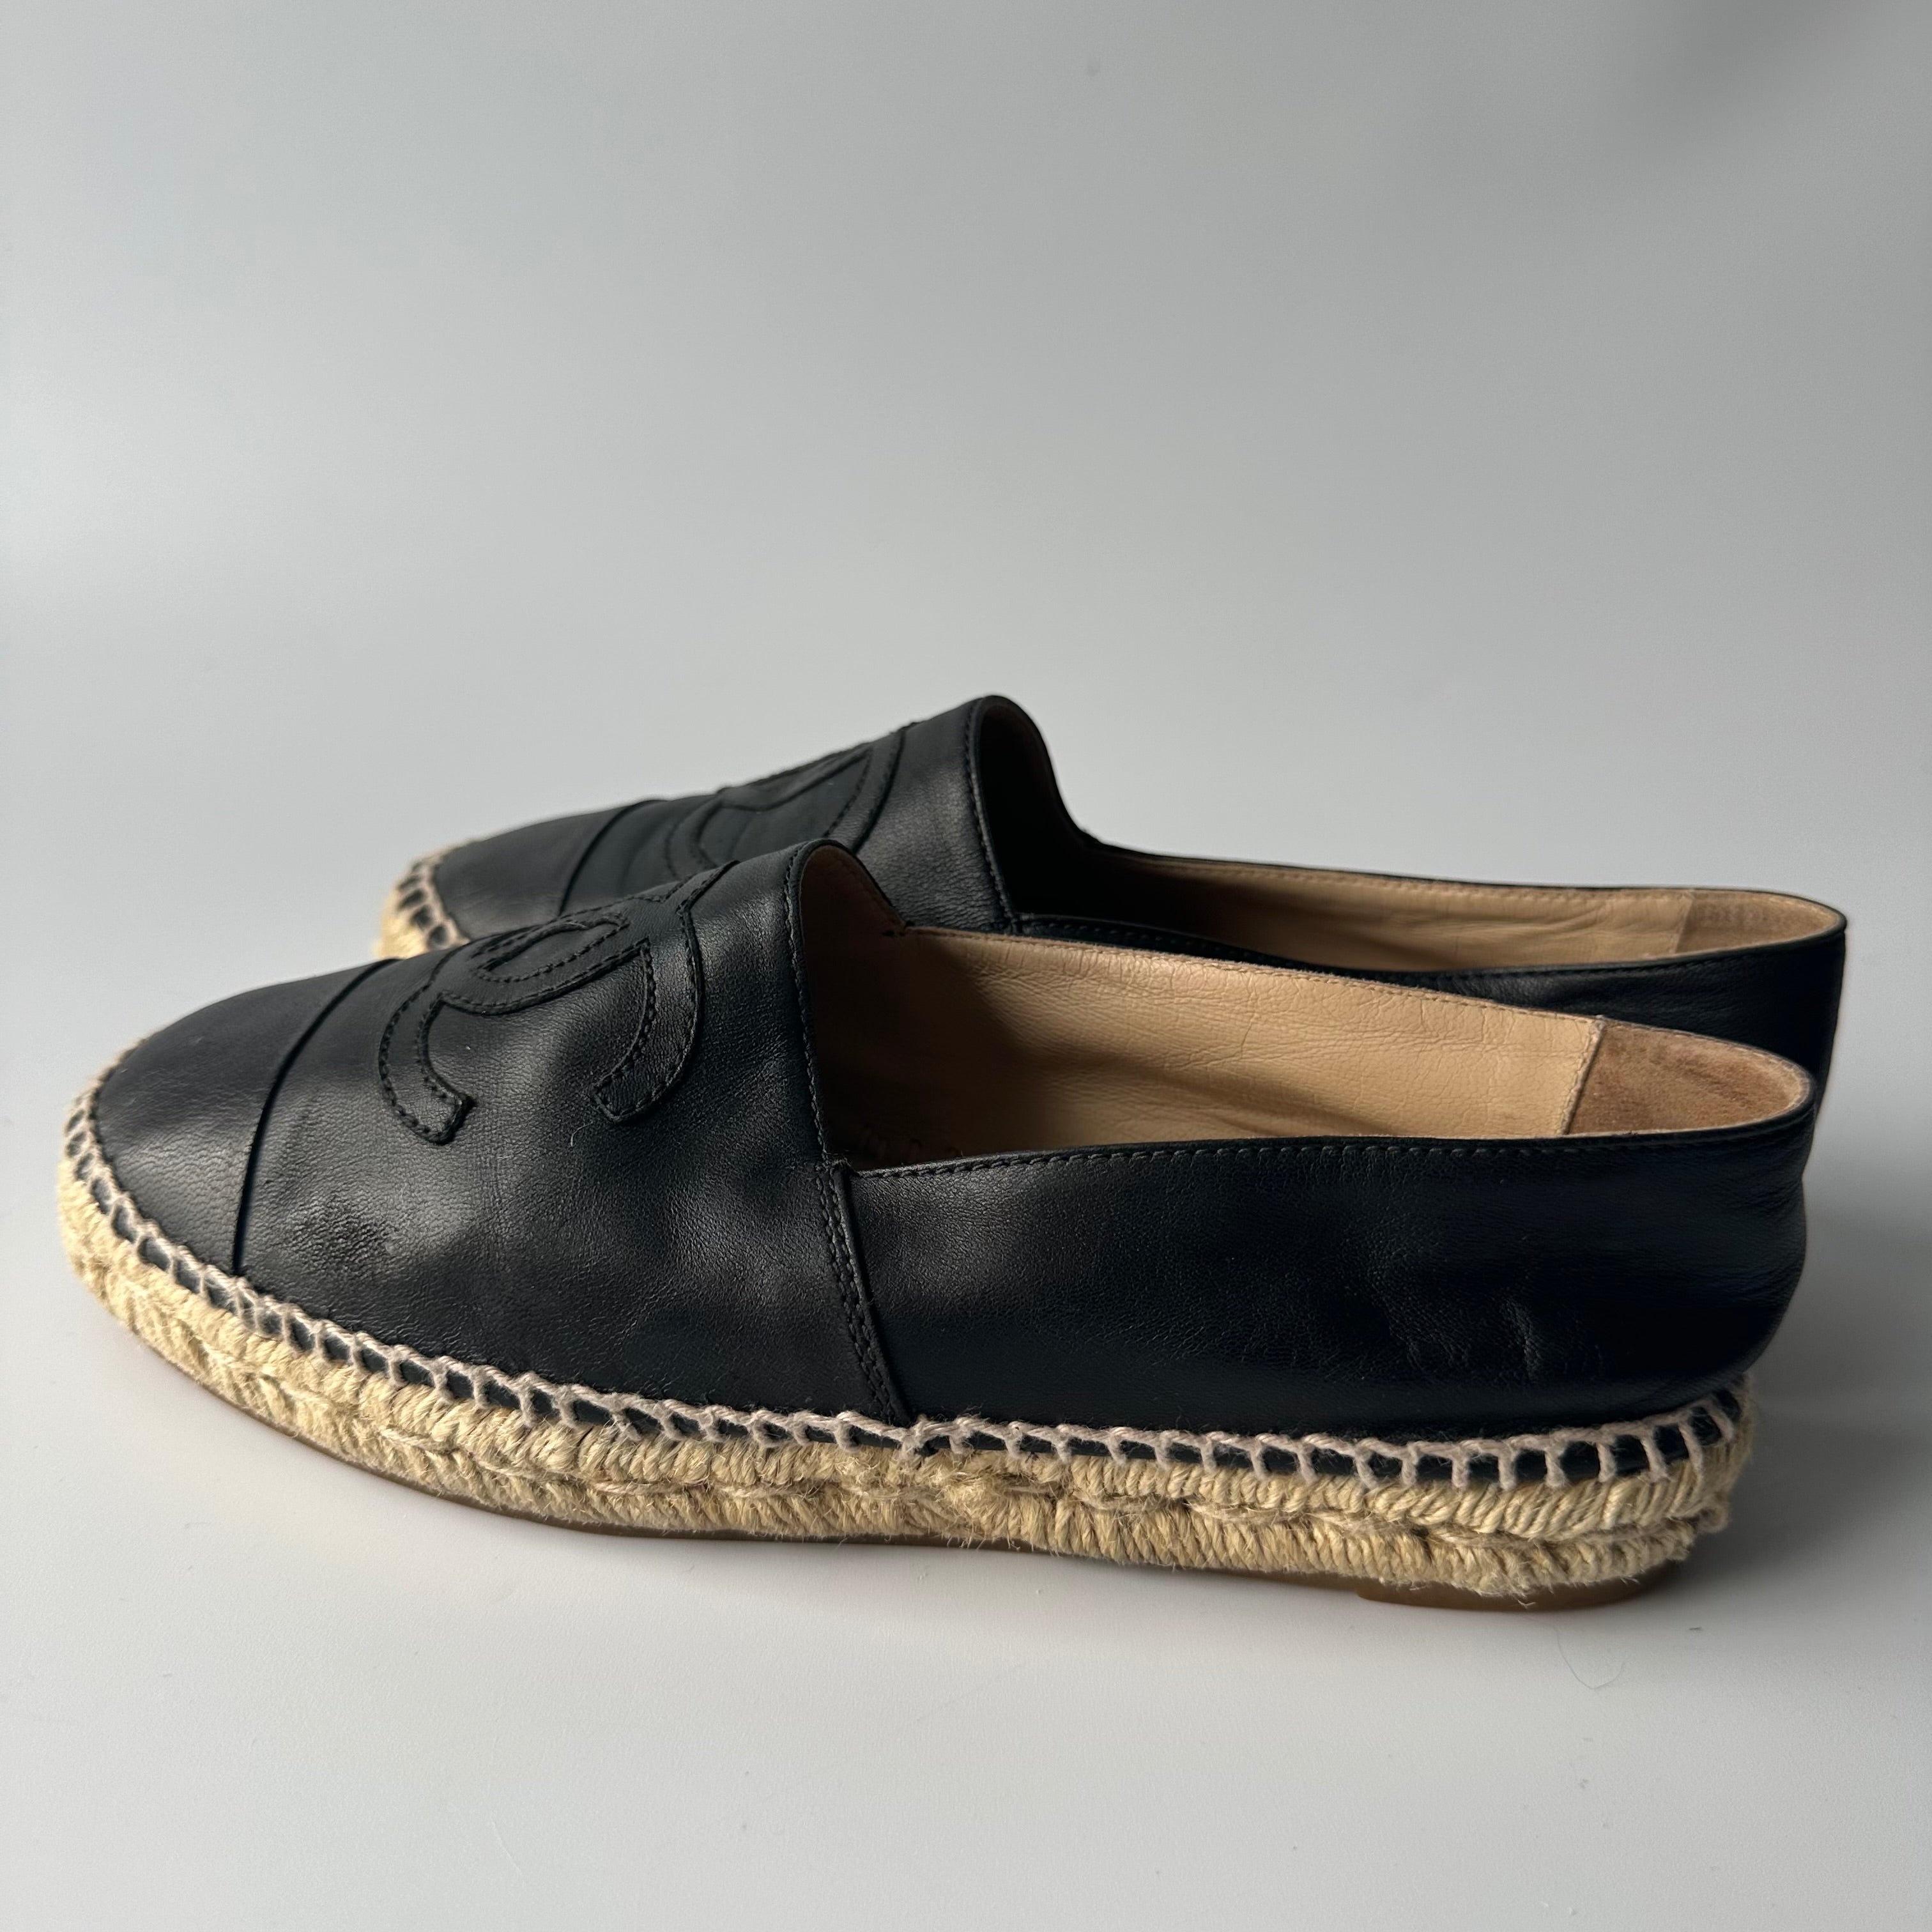 Shop authentic Chanel Quilted Lambskin Leather Espadrilles at